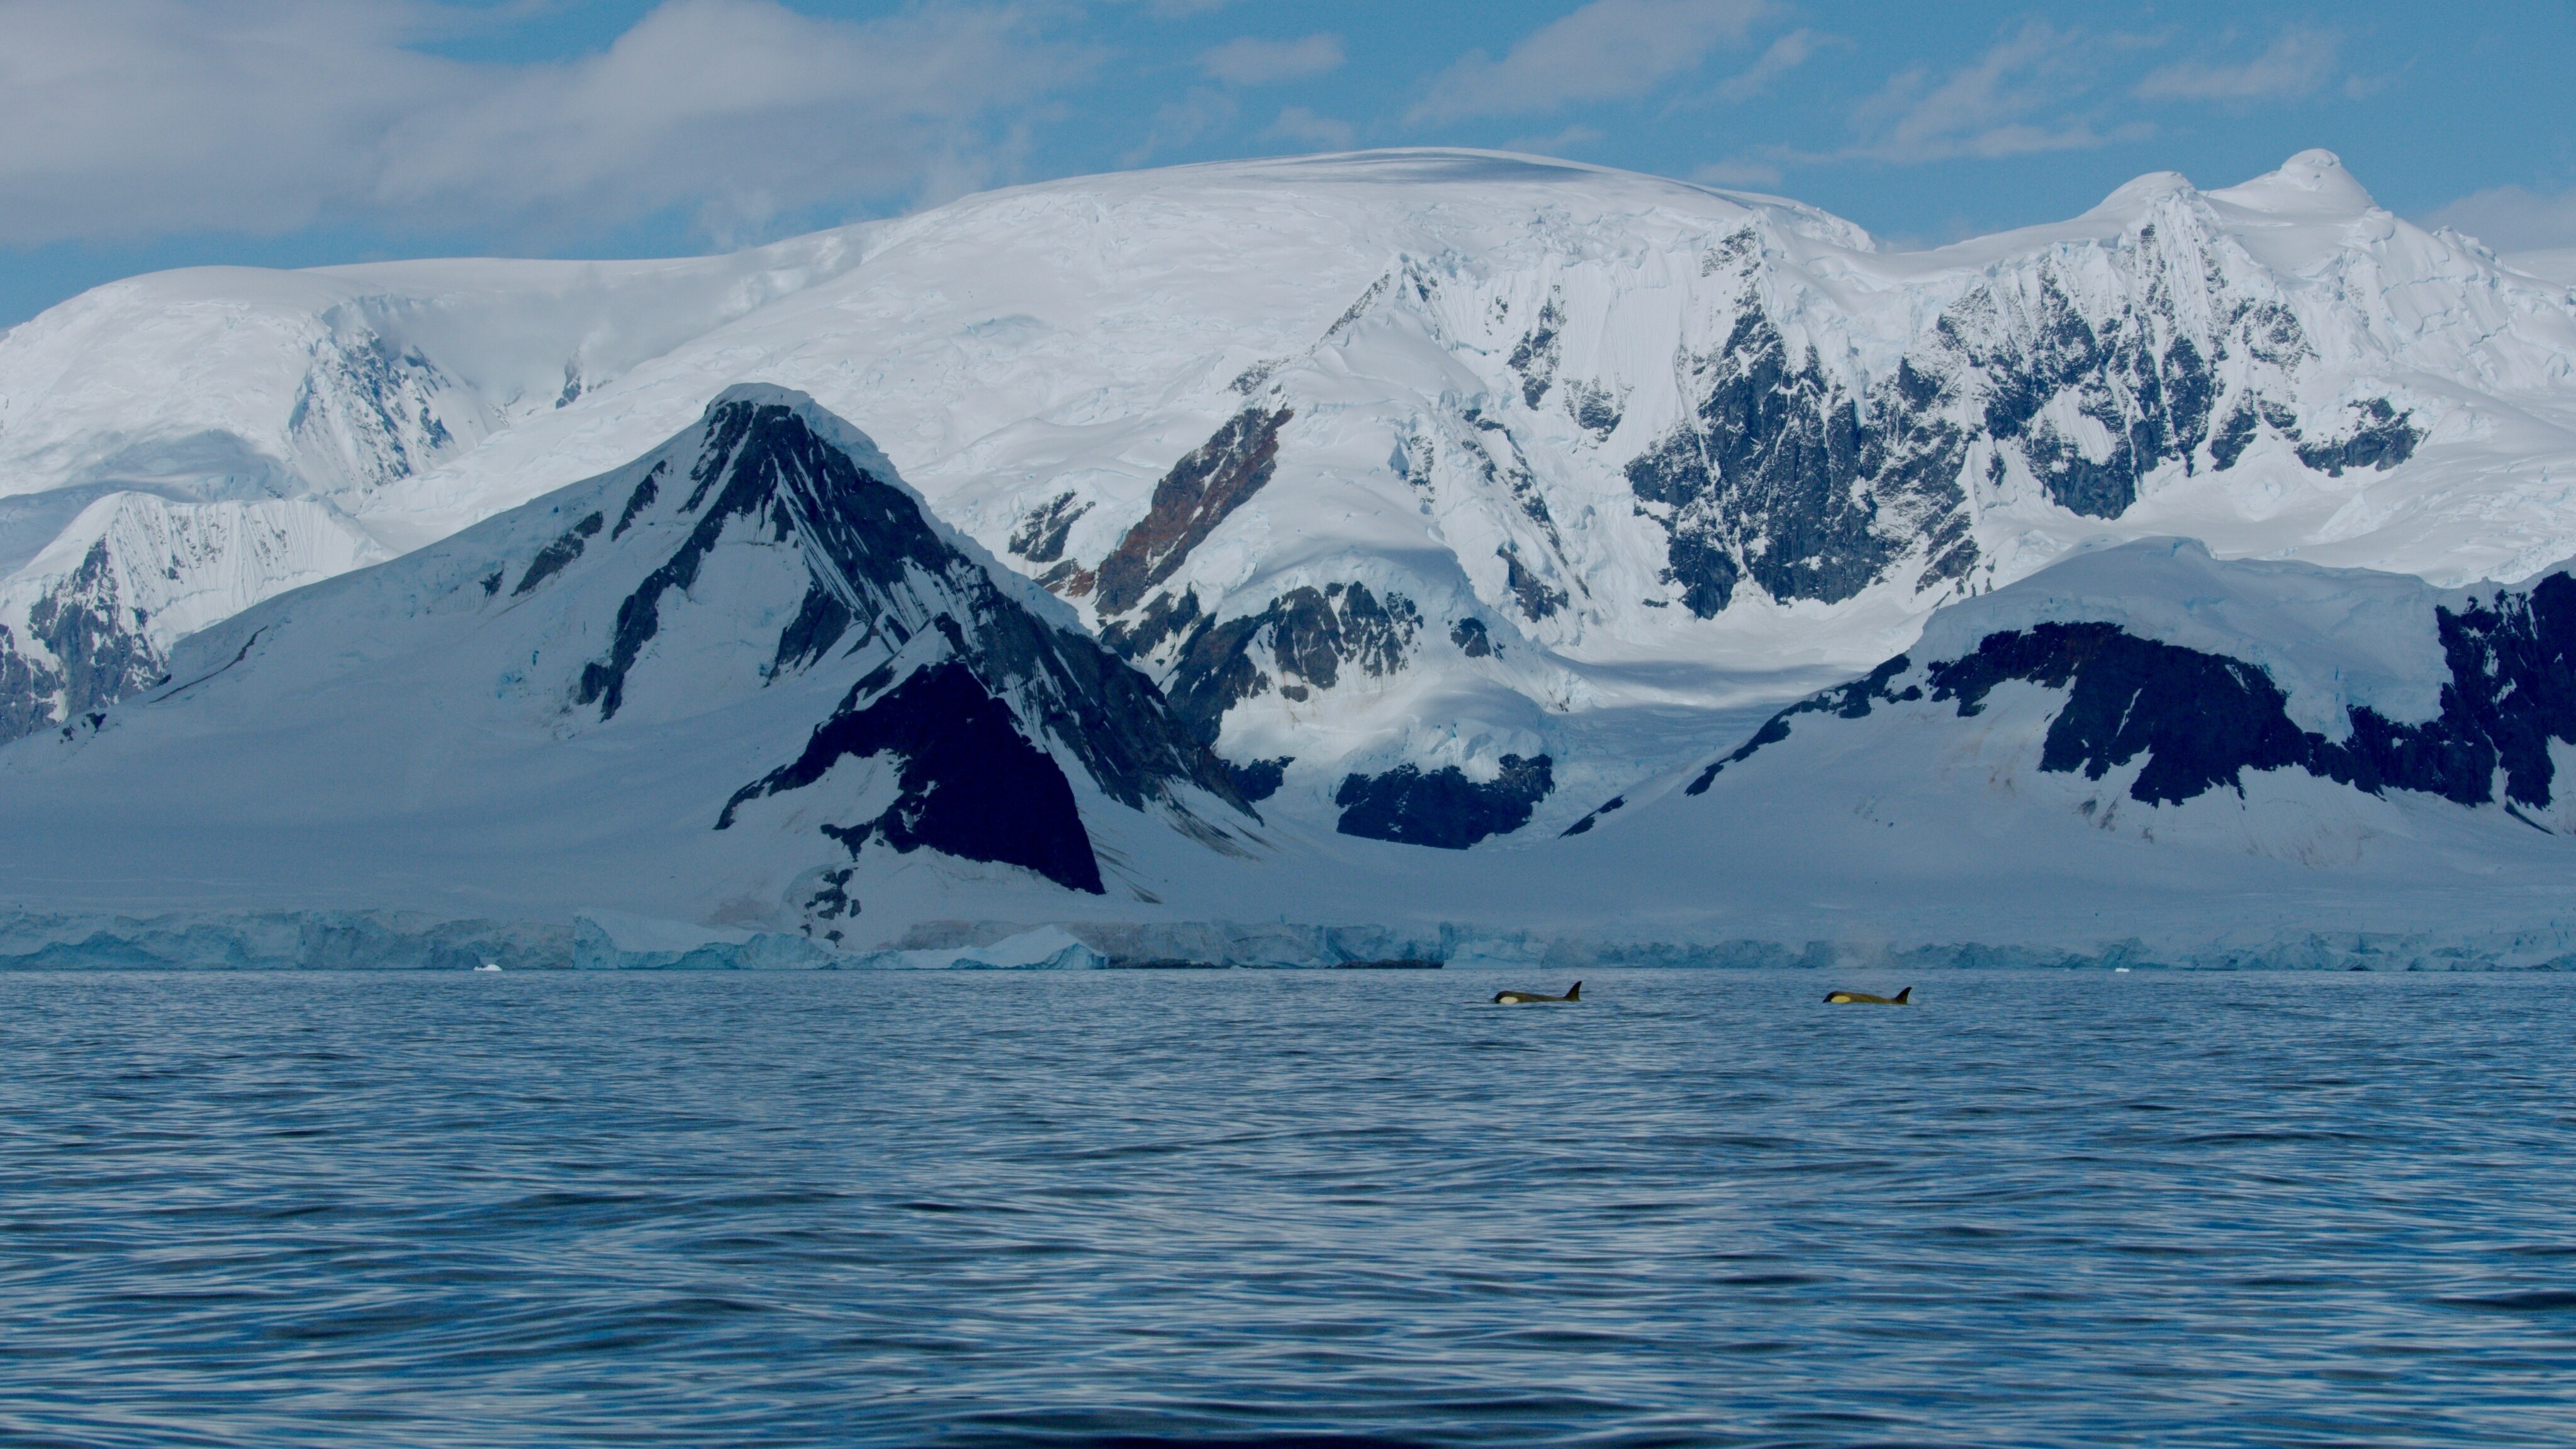 More than 25,000 orcas inhabit the Southern Ocean around Antarctica. (National Geographic for Disney+/Hayes Baxley)